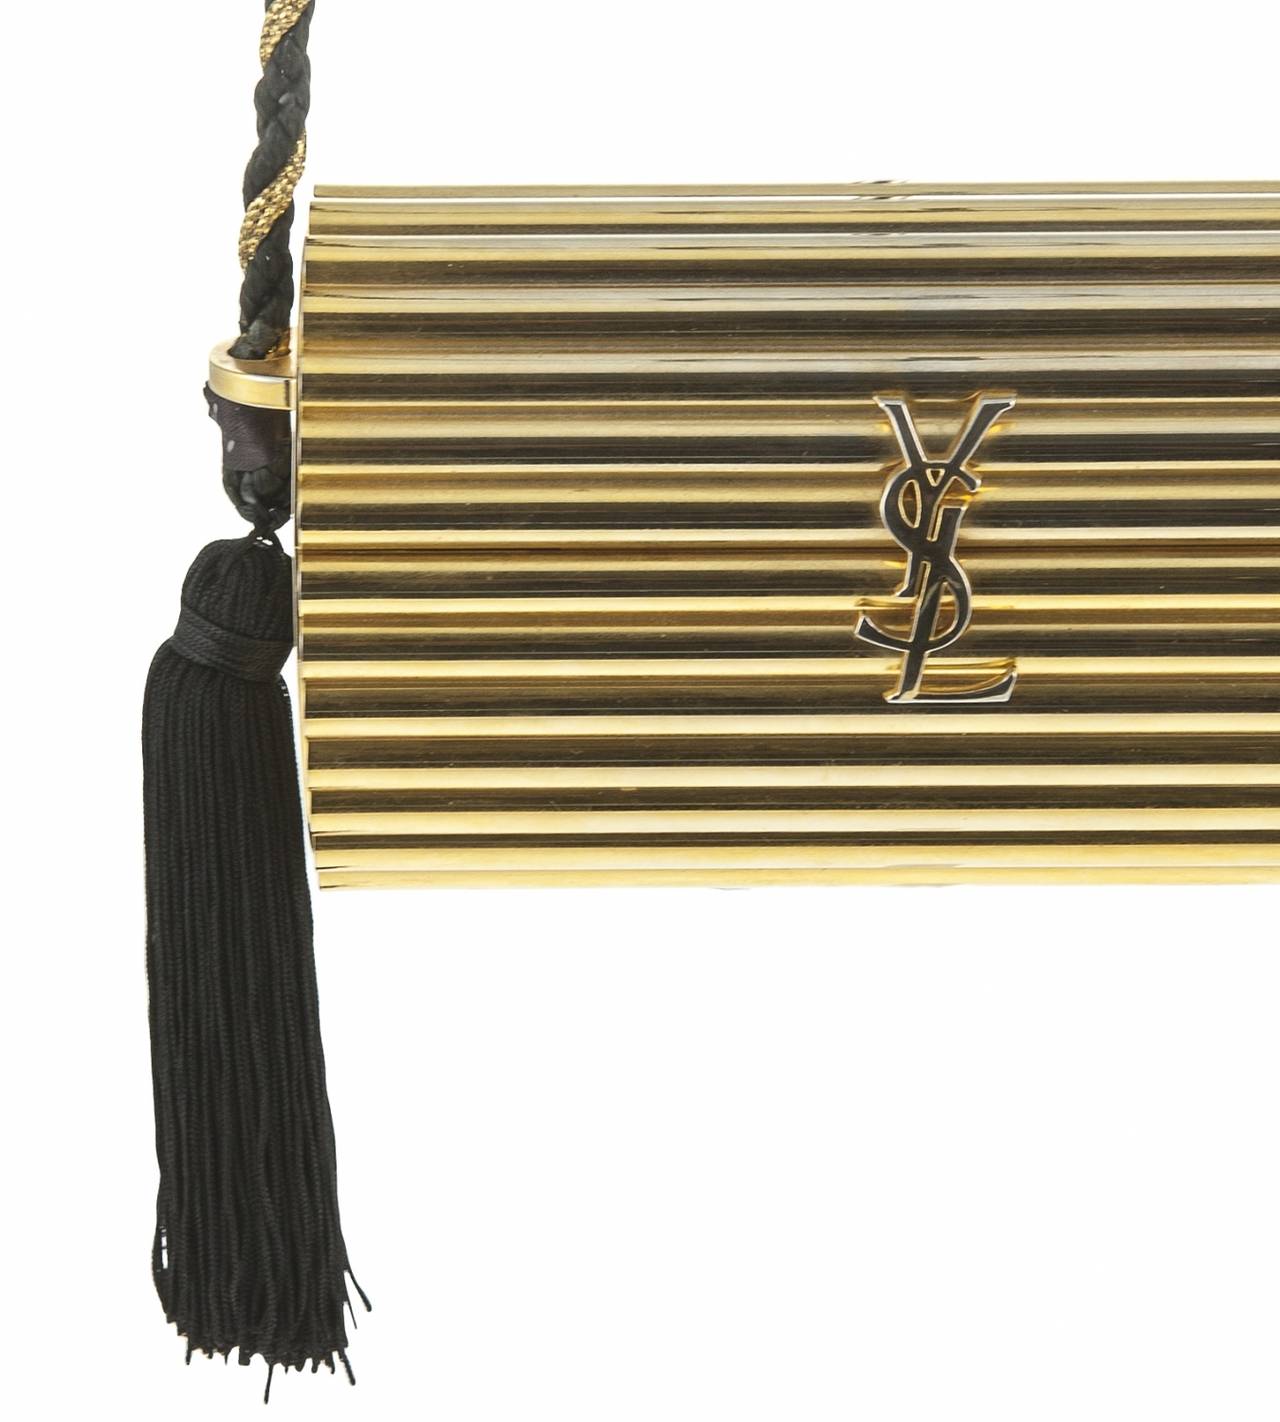 Vintage Yves Saint Laurent Gold Hard Case, Tube Shape, Evening Bag With Black And Gold Cord Strap With Hanging Tassels. YSL Logo Clasp.
Width - 15cms
Height - 9cms
Depth - 5cms
Strap Length - 56cms
Excellent Vintage Condition.